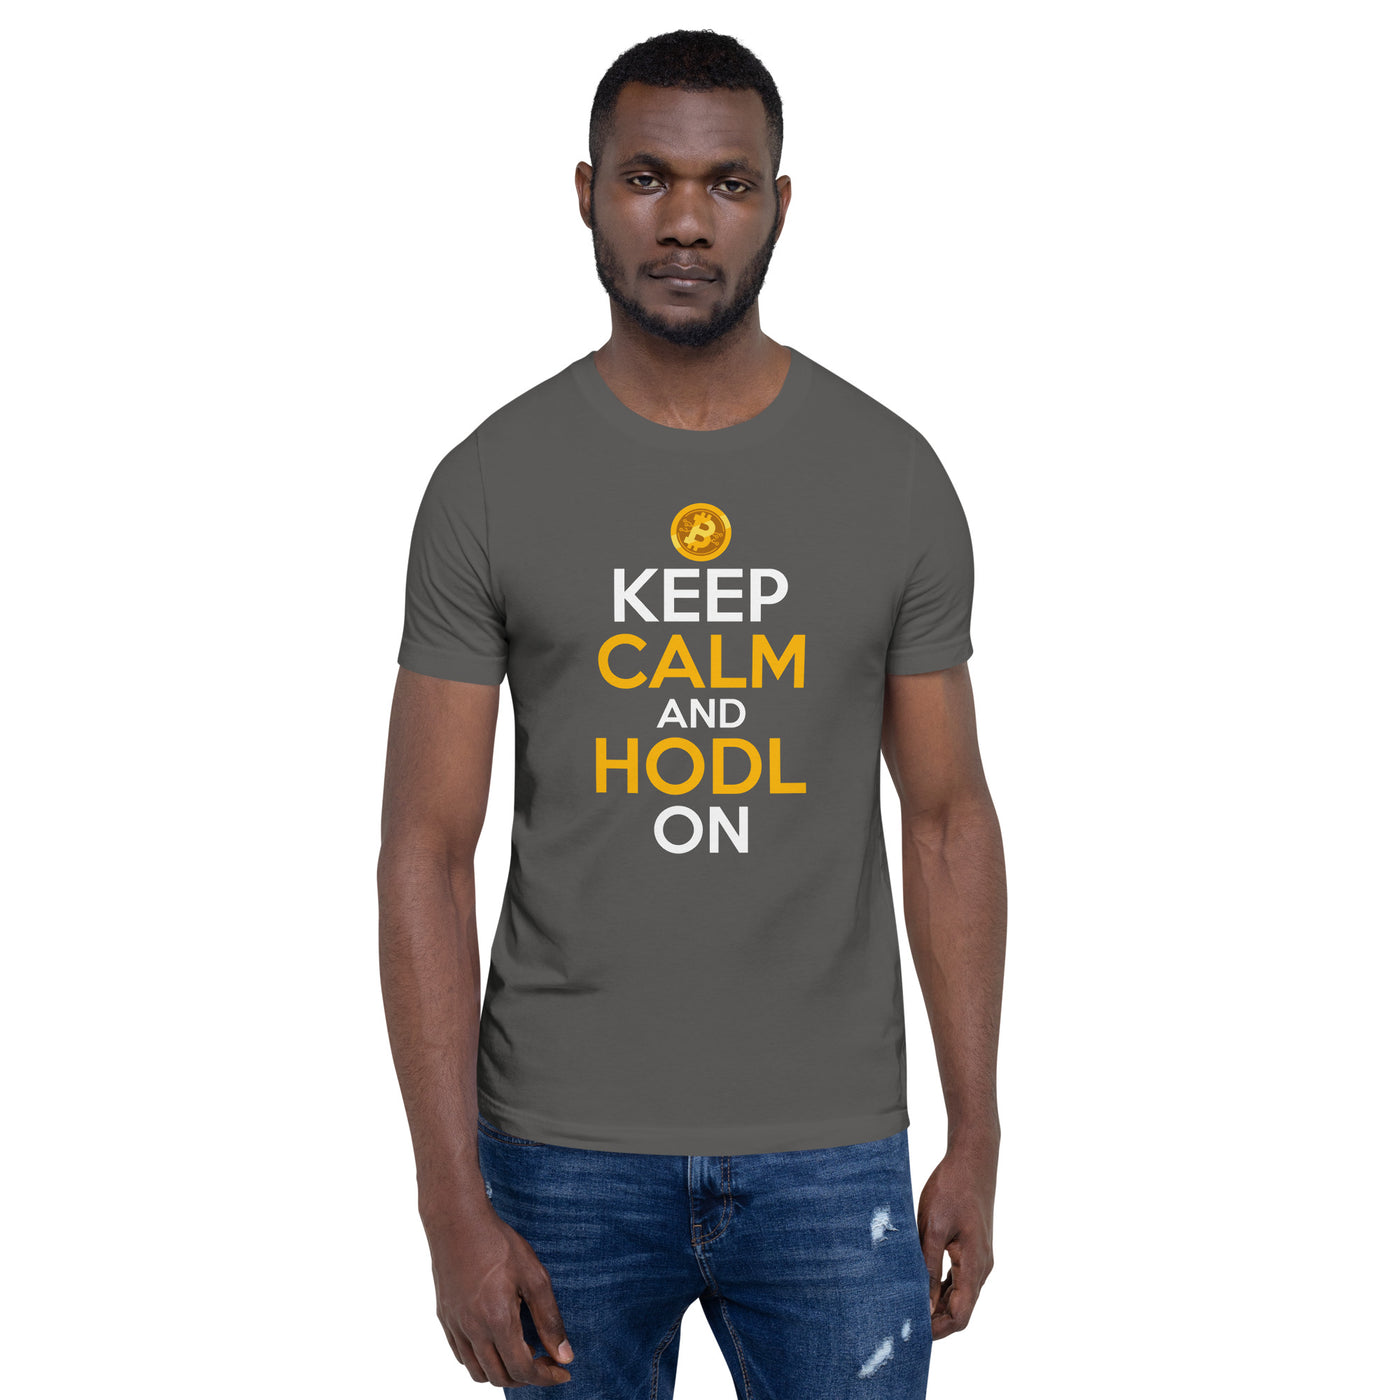 Keep Calm and HODL On ( Yellow and White Text ) - Unisex t-shirt